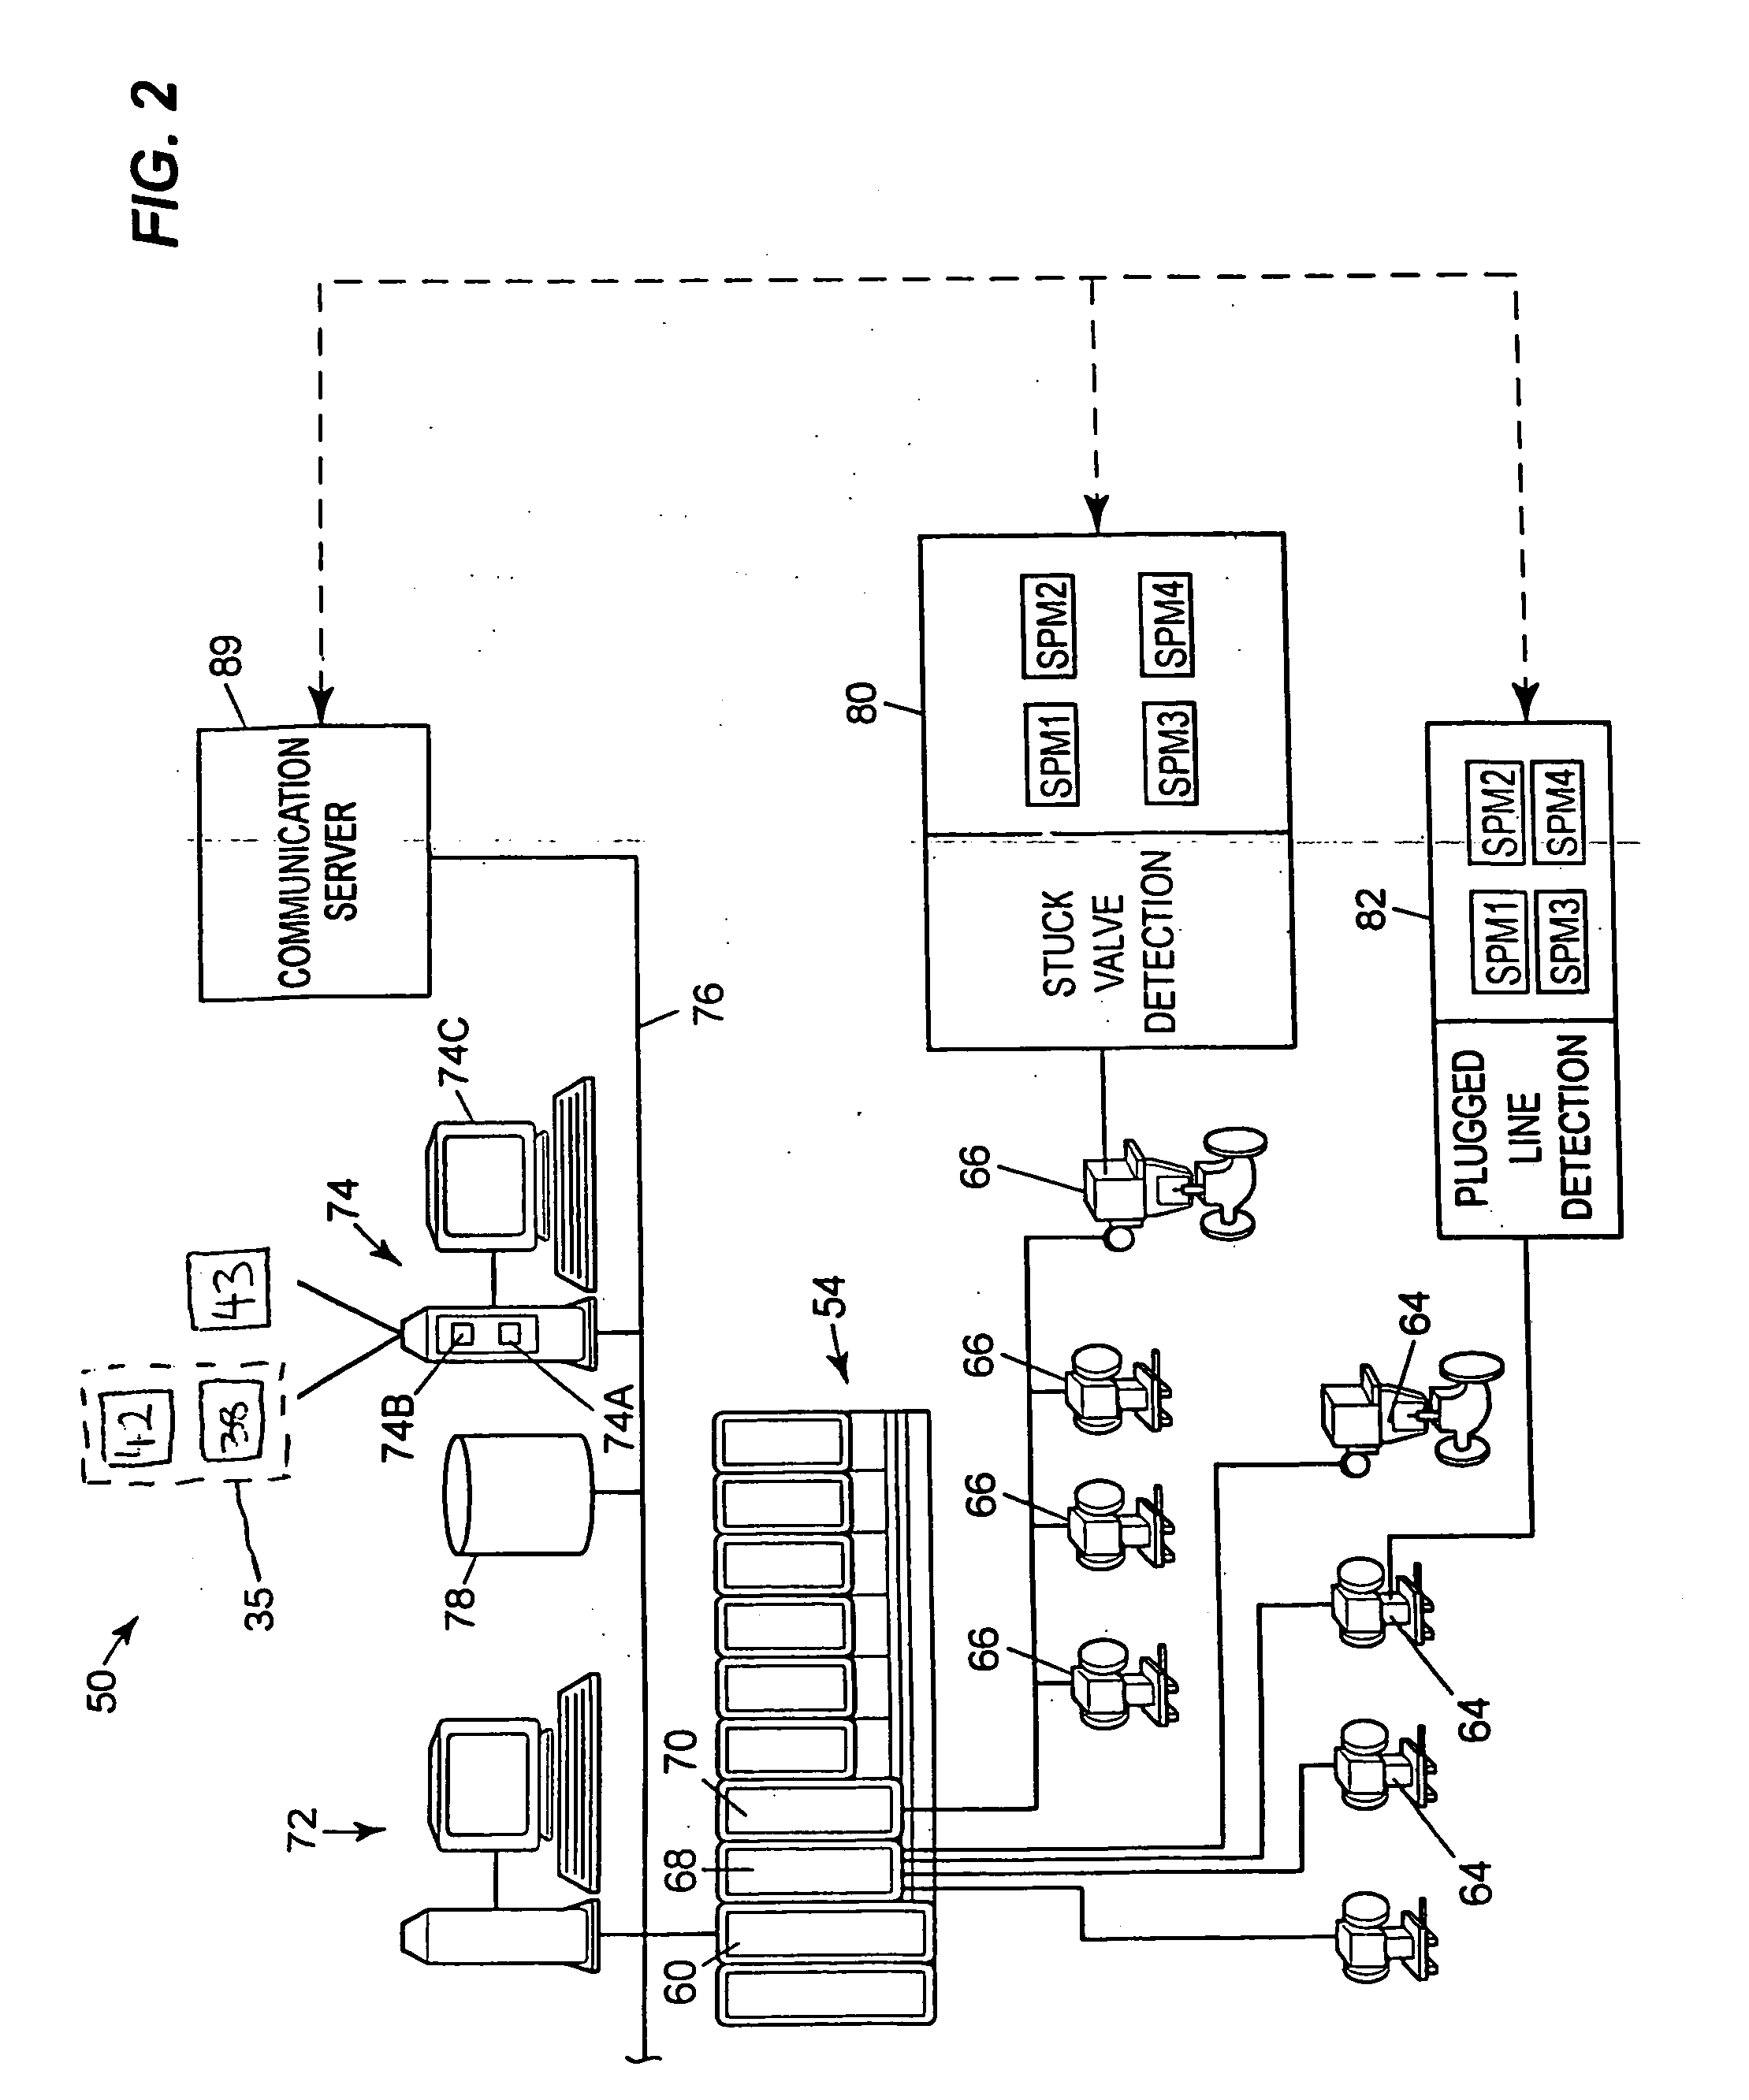 Method and system for detecting abnormal operation in a process plant